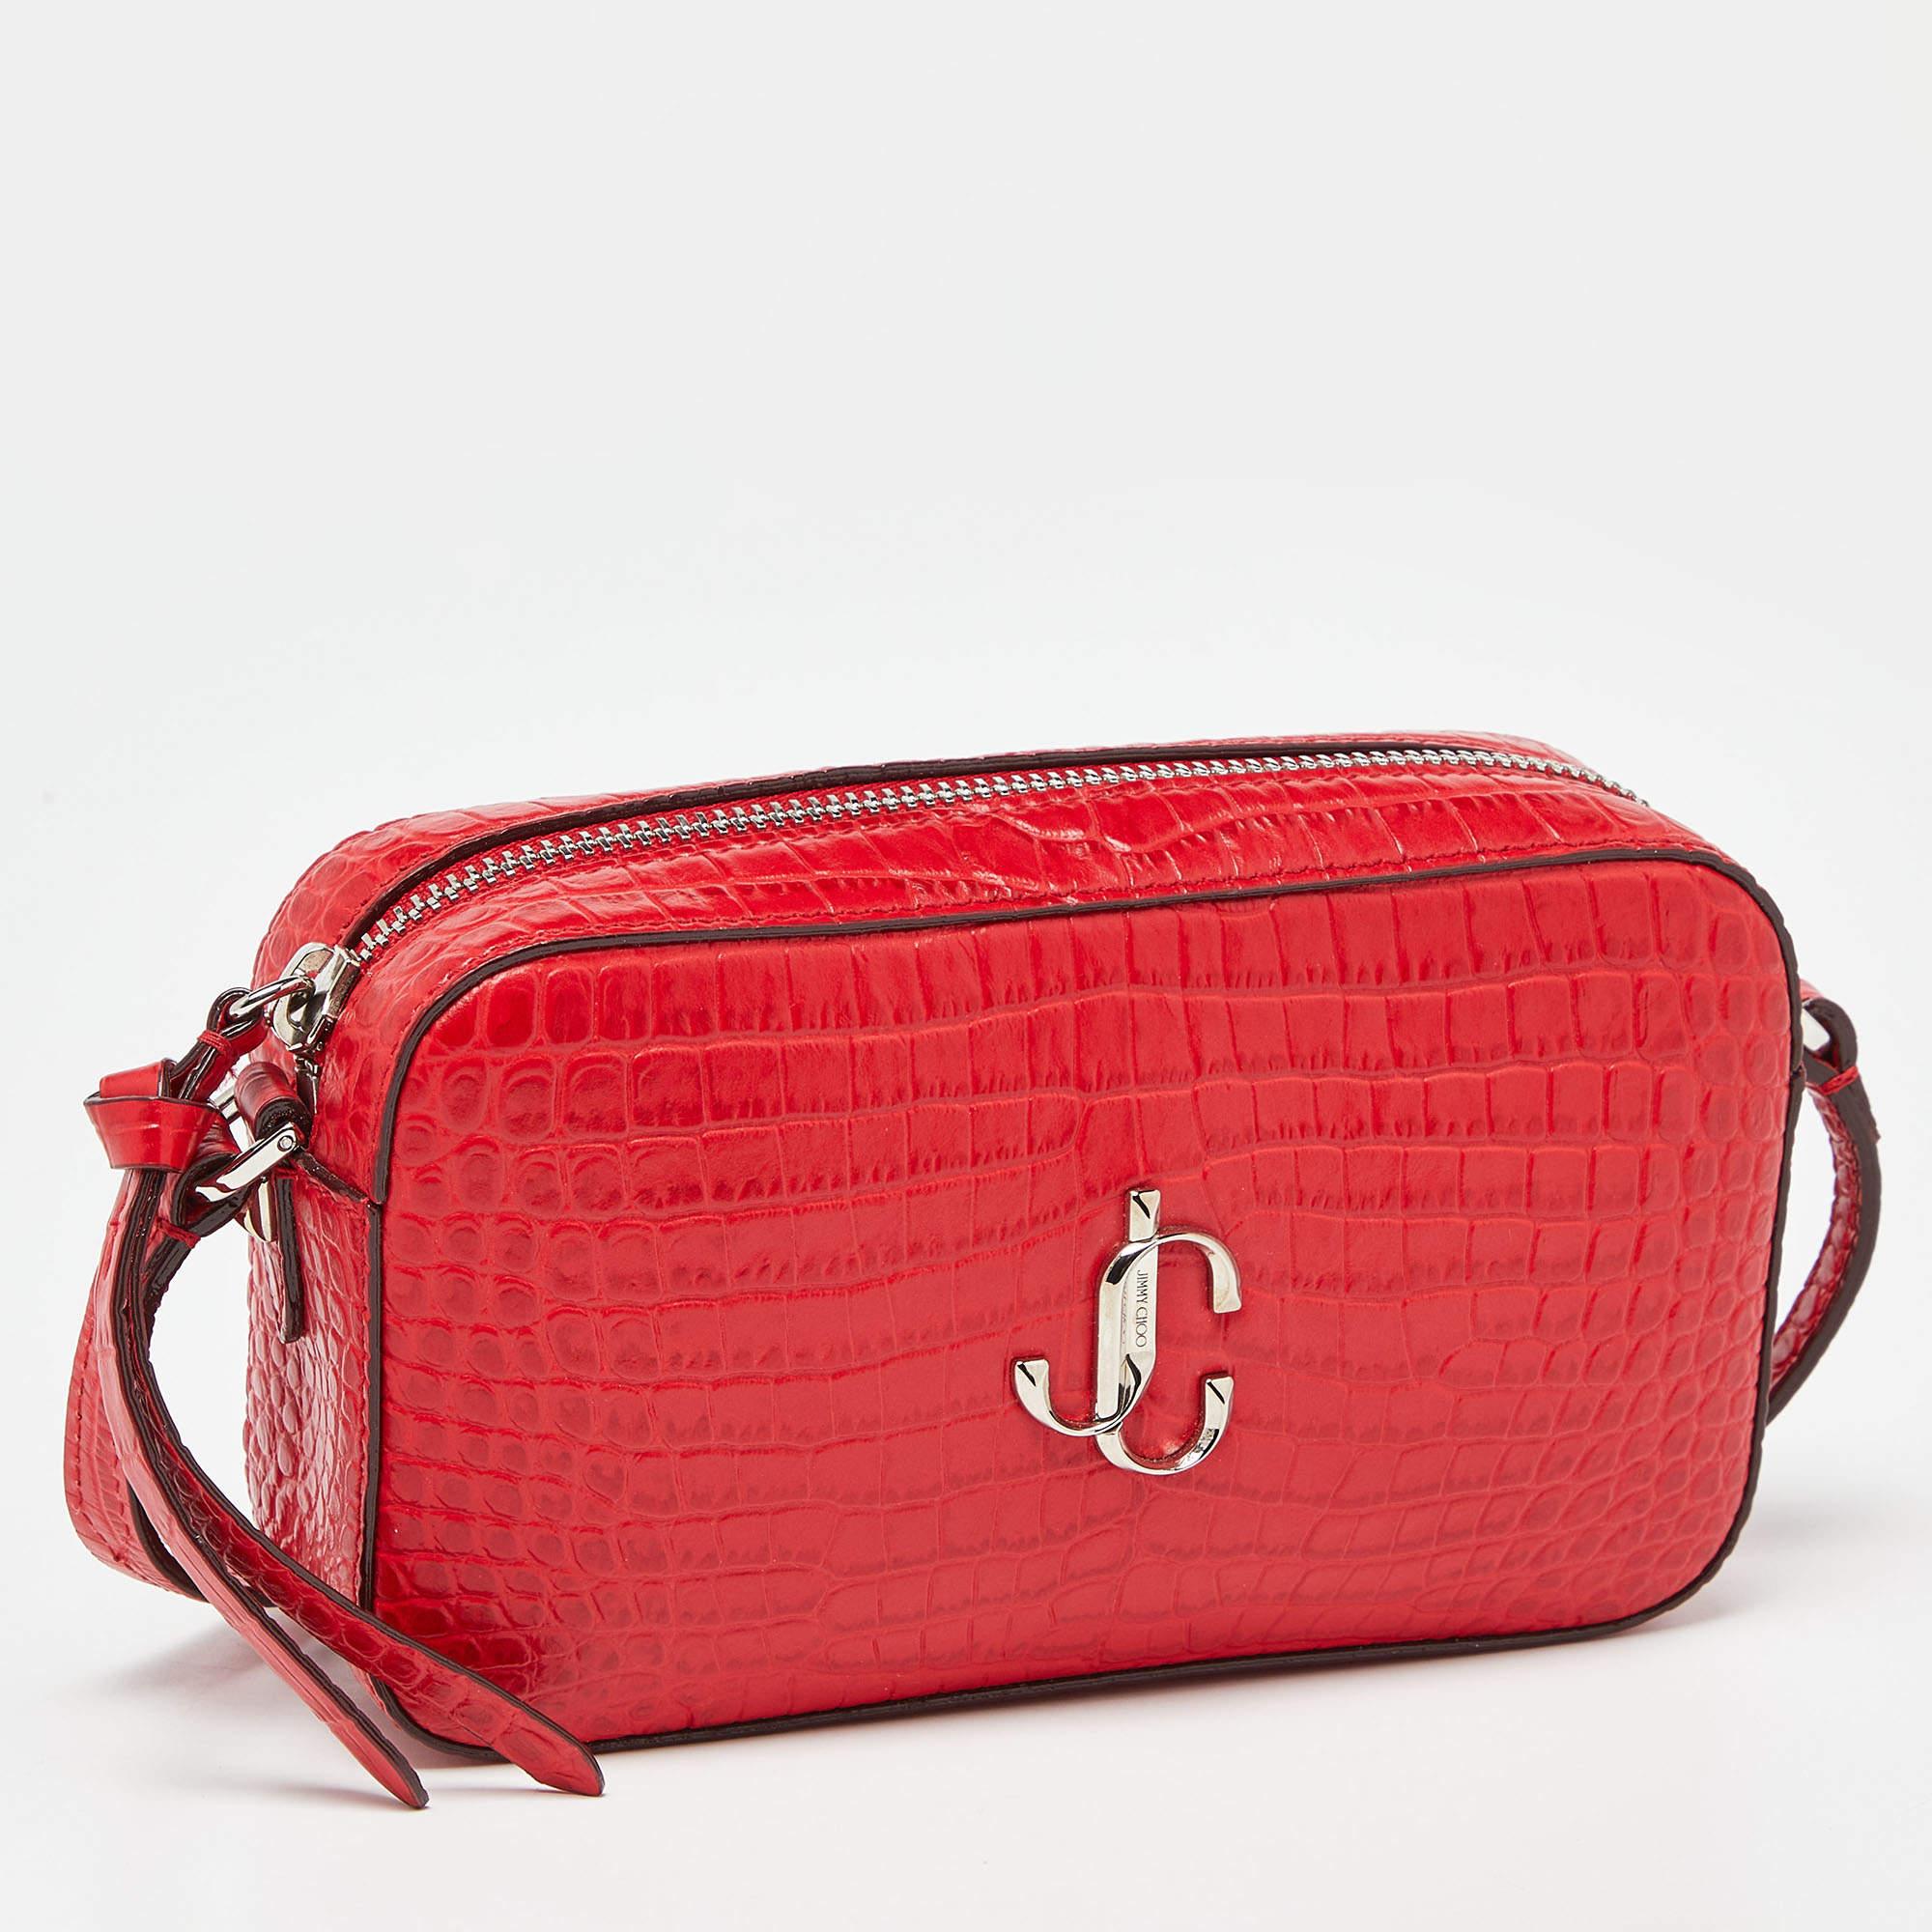 This camera bag by Jimmy Choo is a creation that is not only stylish but also exceptionally well-made. Meticulously crafted, it flaunts a modern JC logo and a top zipper leading way to a well-lined interior.

